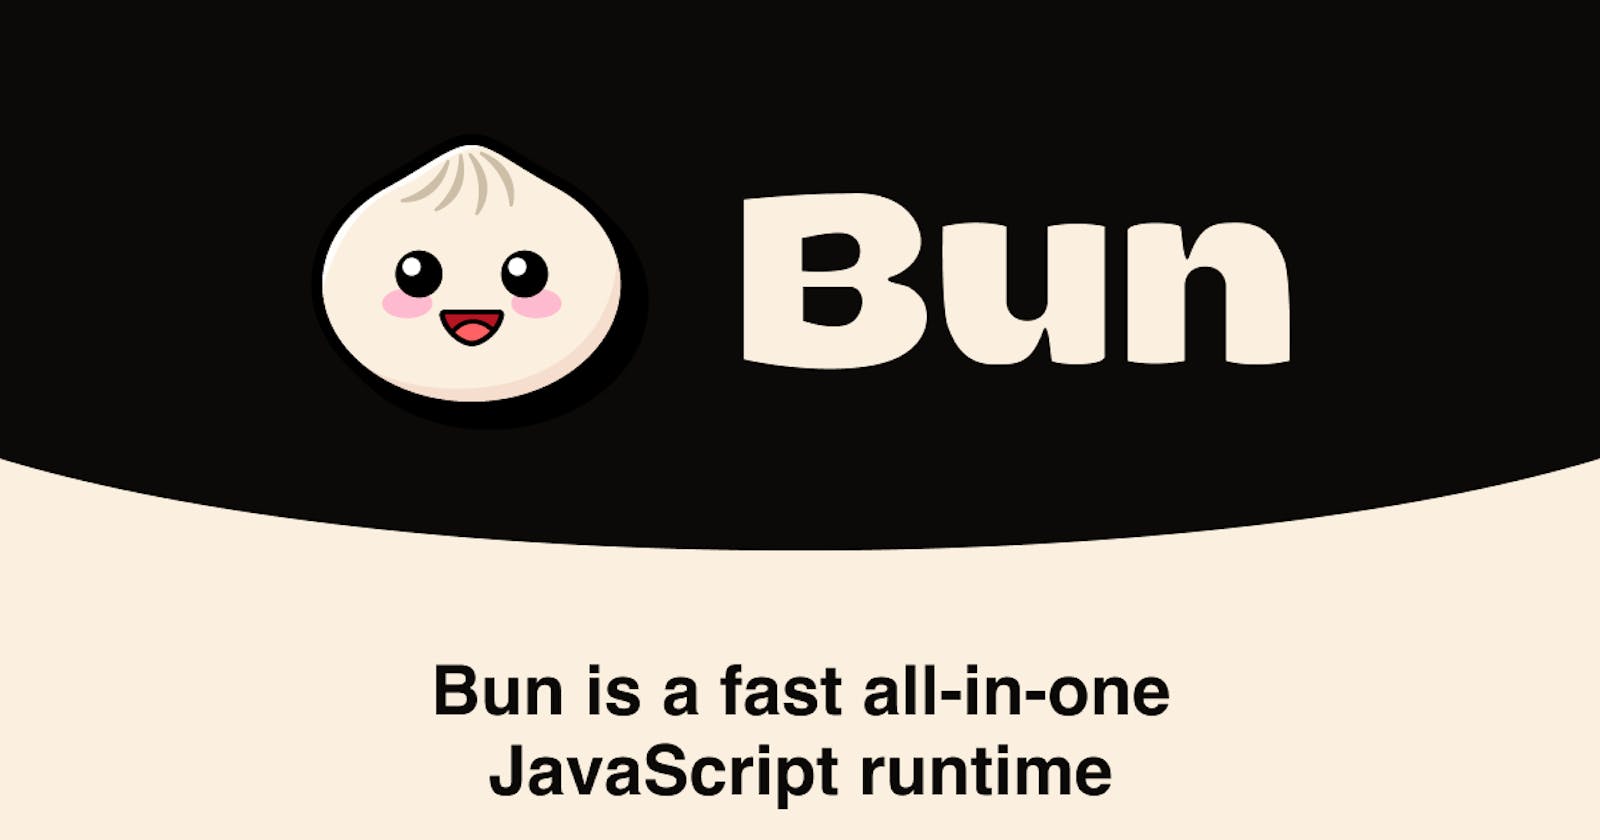 Bun: Is it fast for test automation?